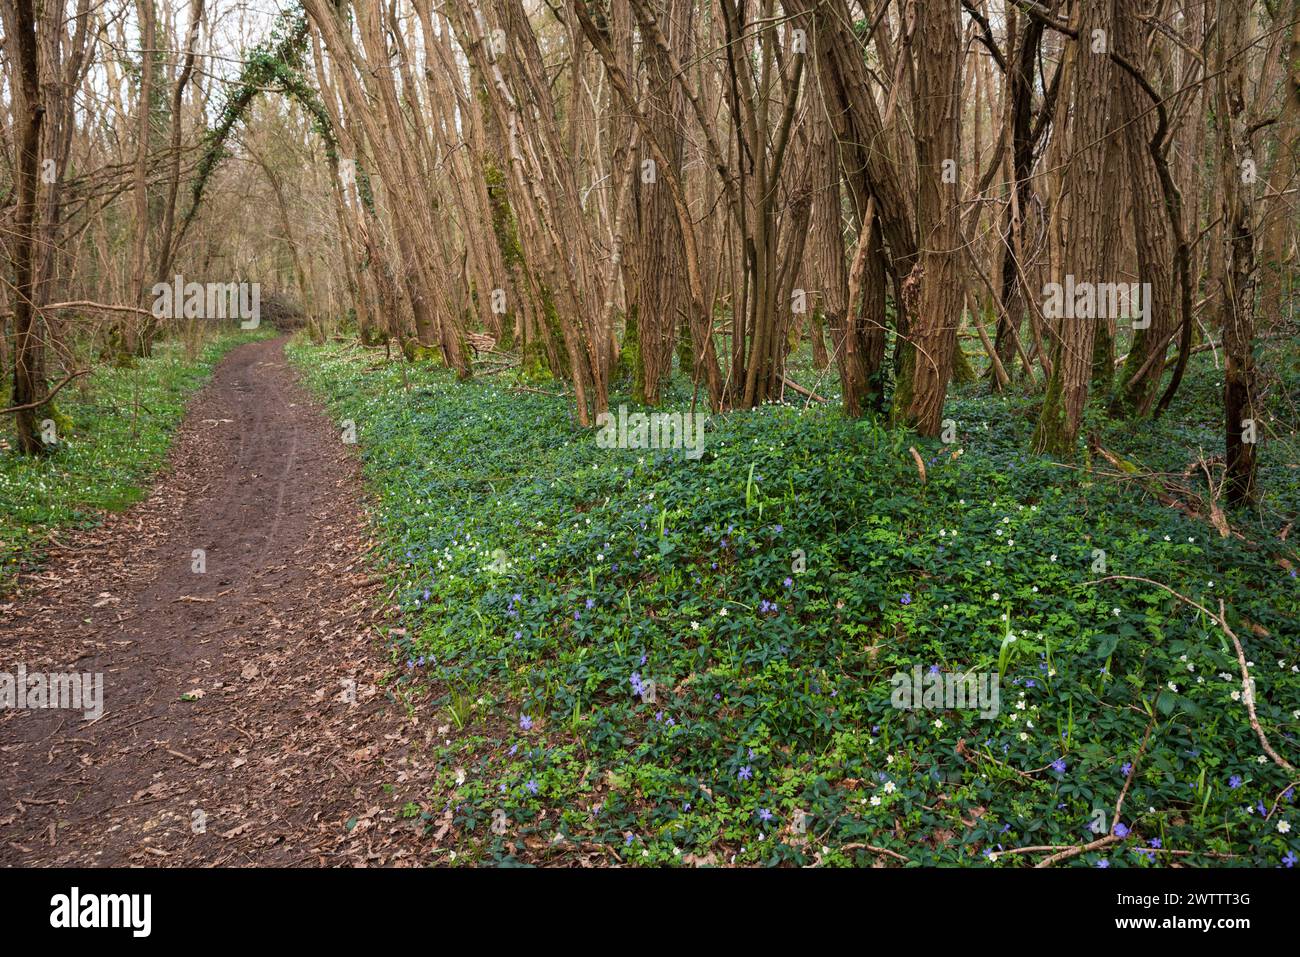 Hiking trail through beautiful forest landscape in spring with blooming wild wood anemone and small periwinkle flowers. Ile-de-France, France. Stock Photo